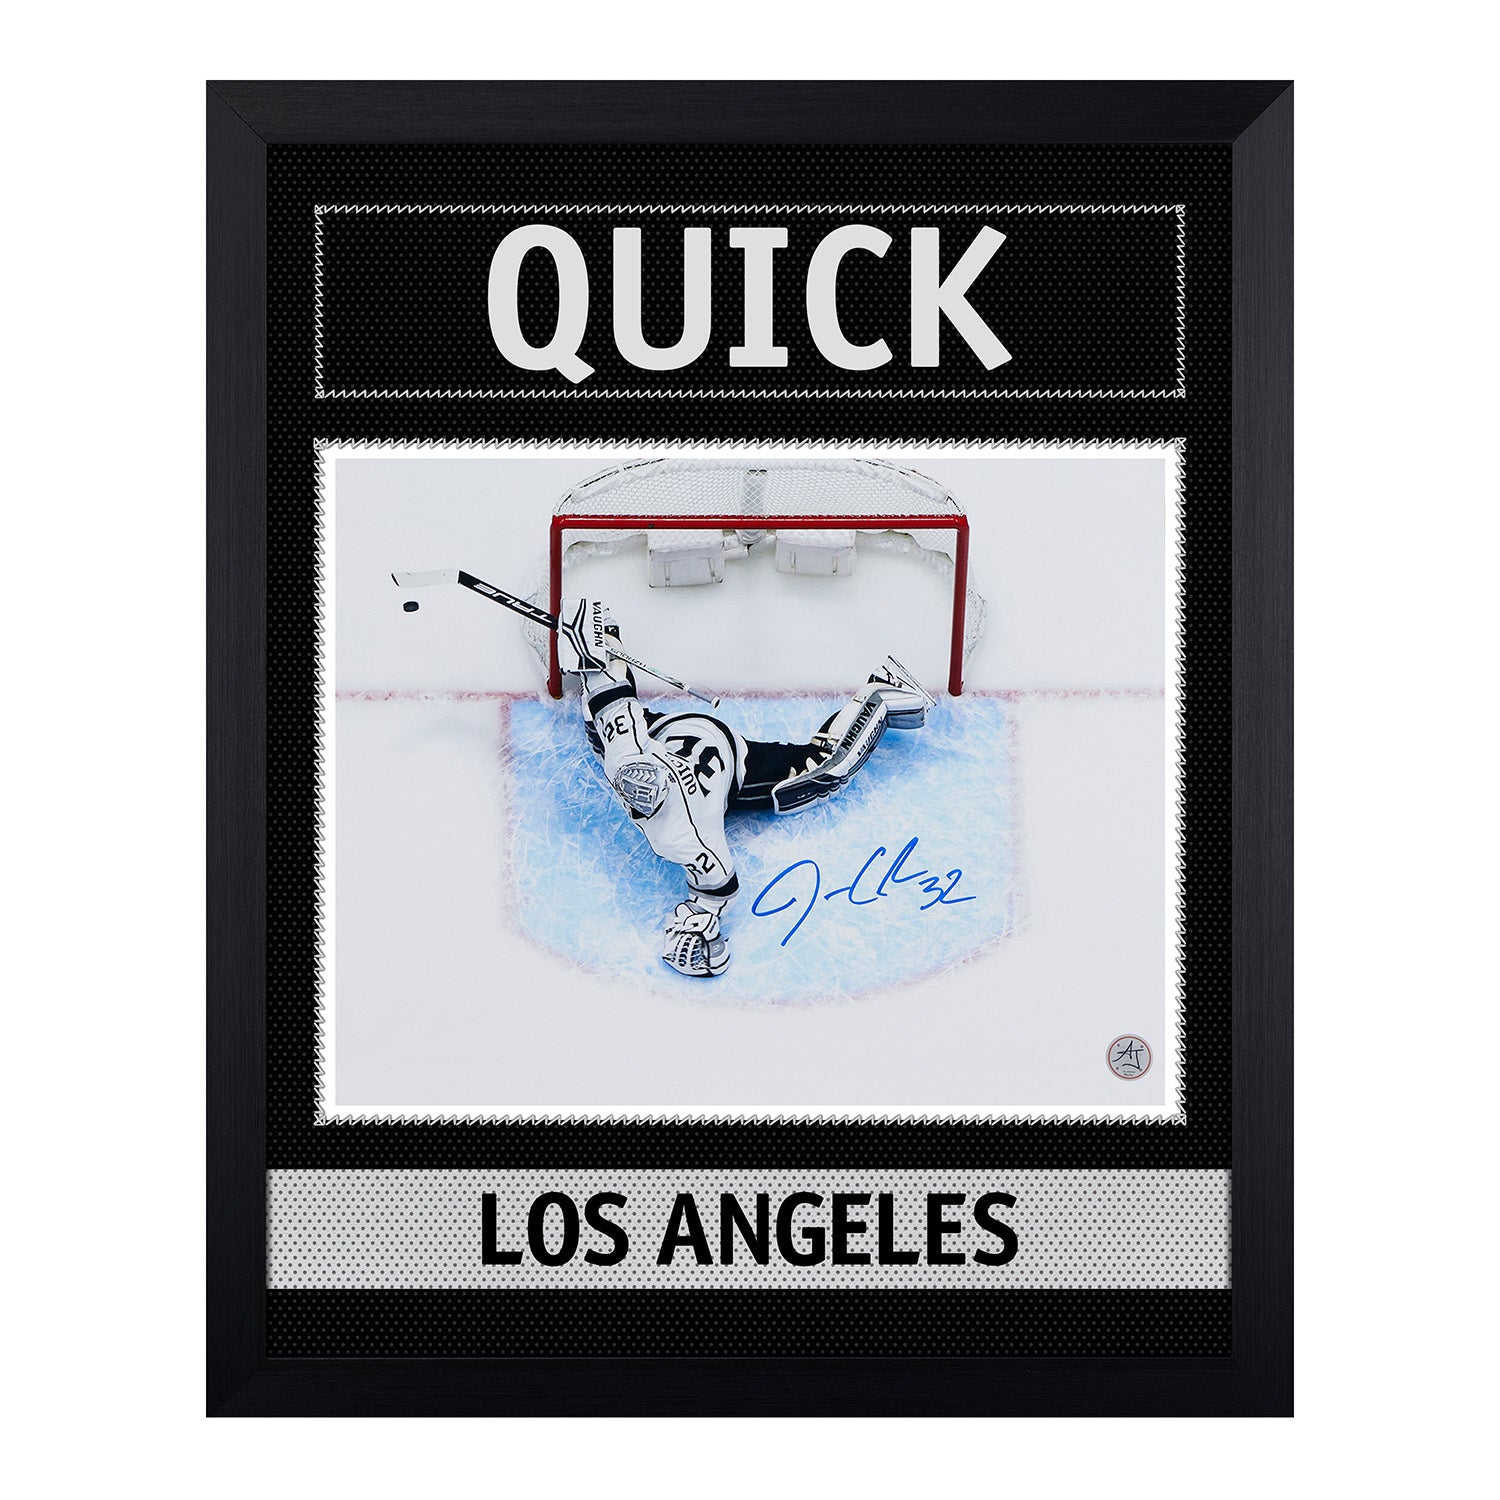 Jonathan Quick Signed Los Angeles Kings Uniform Graphic 19x23 Frame